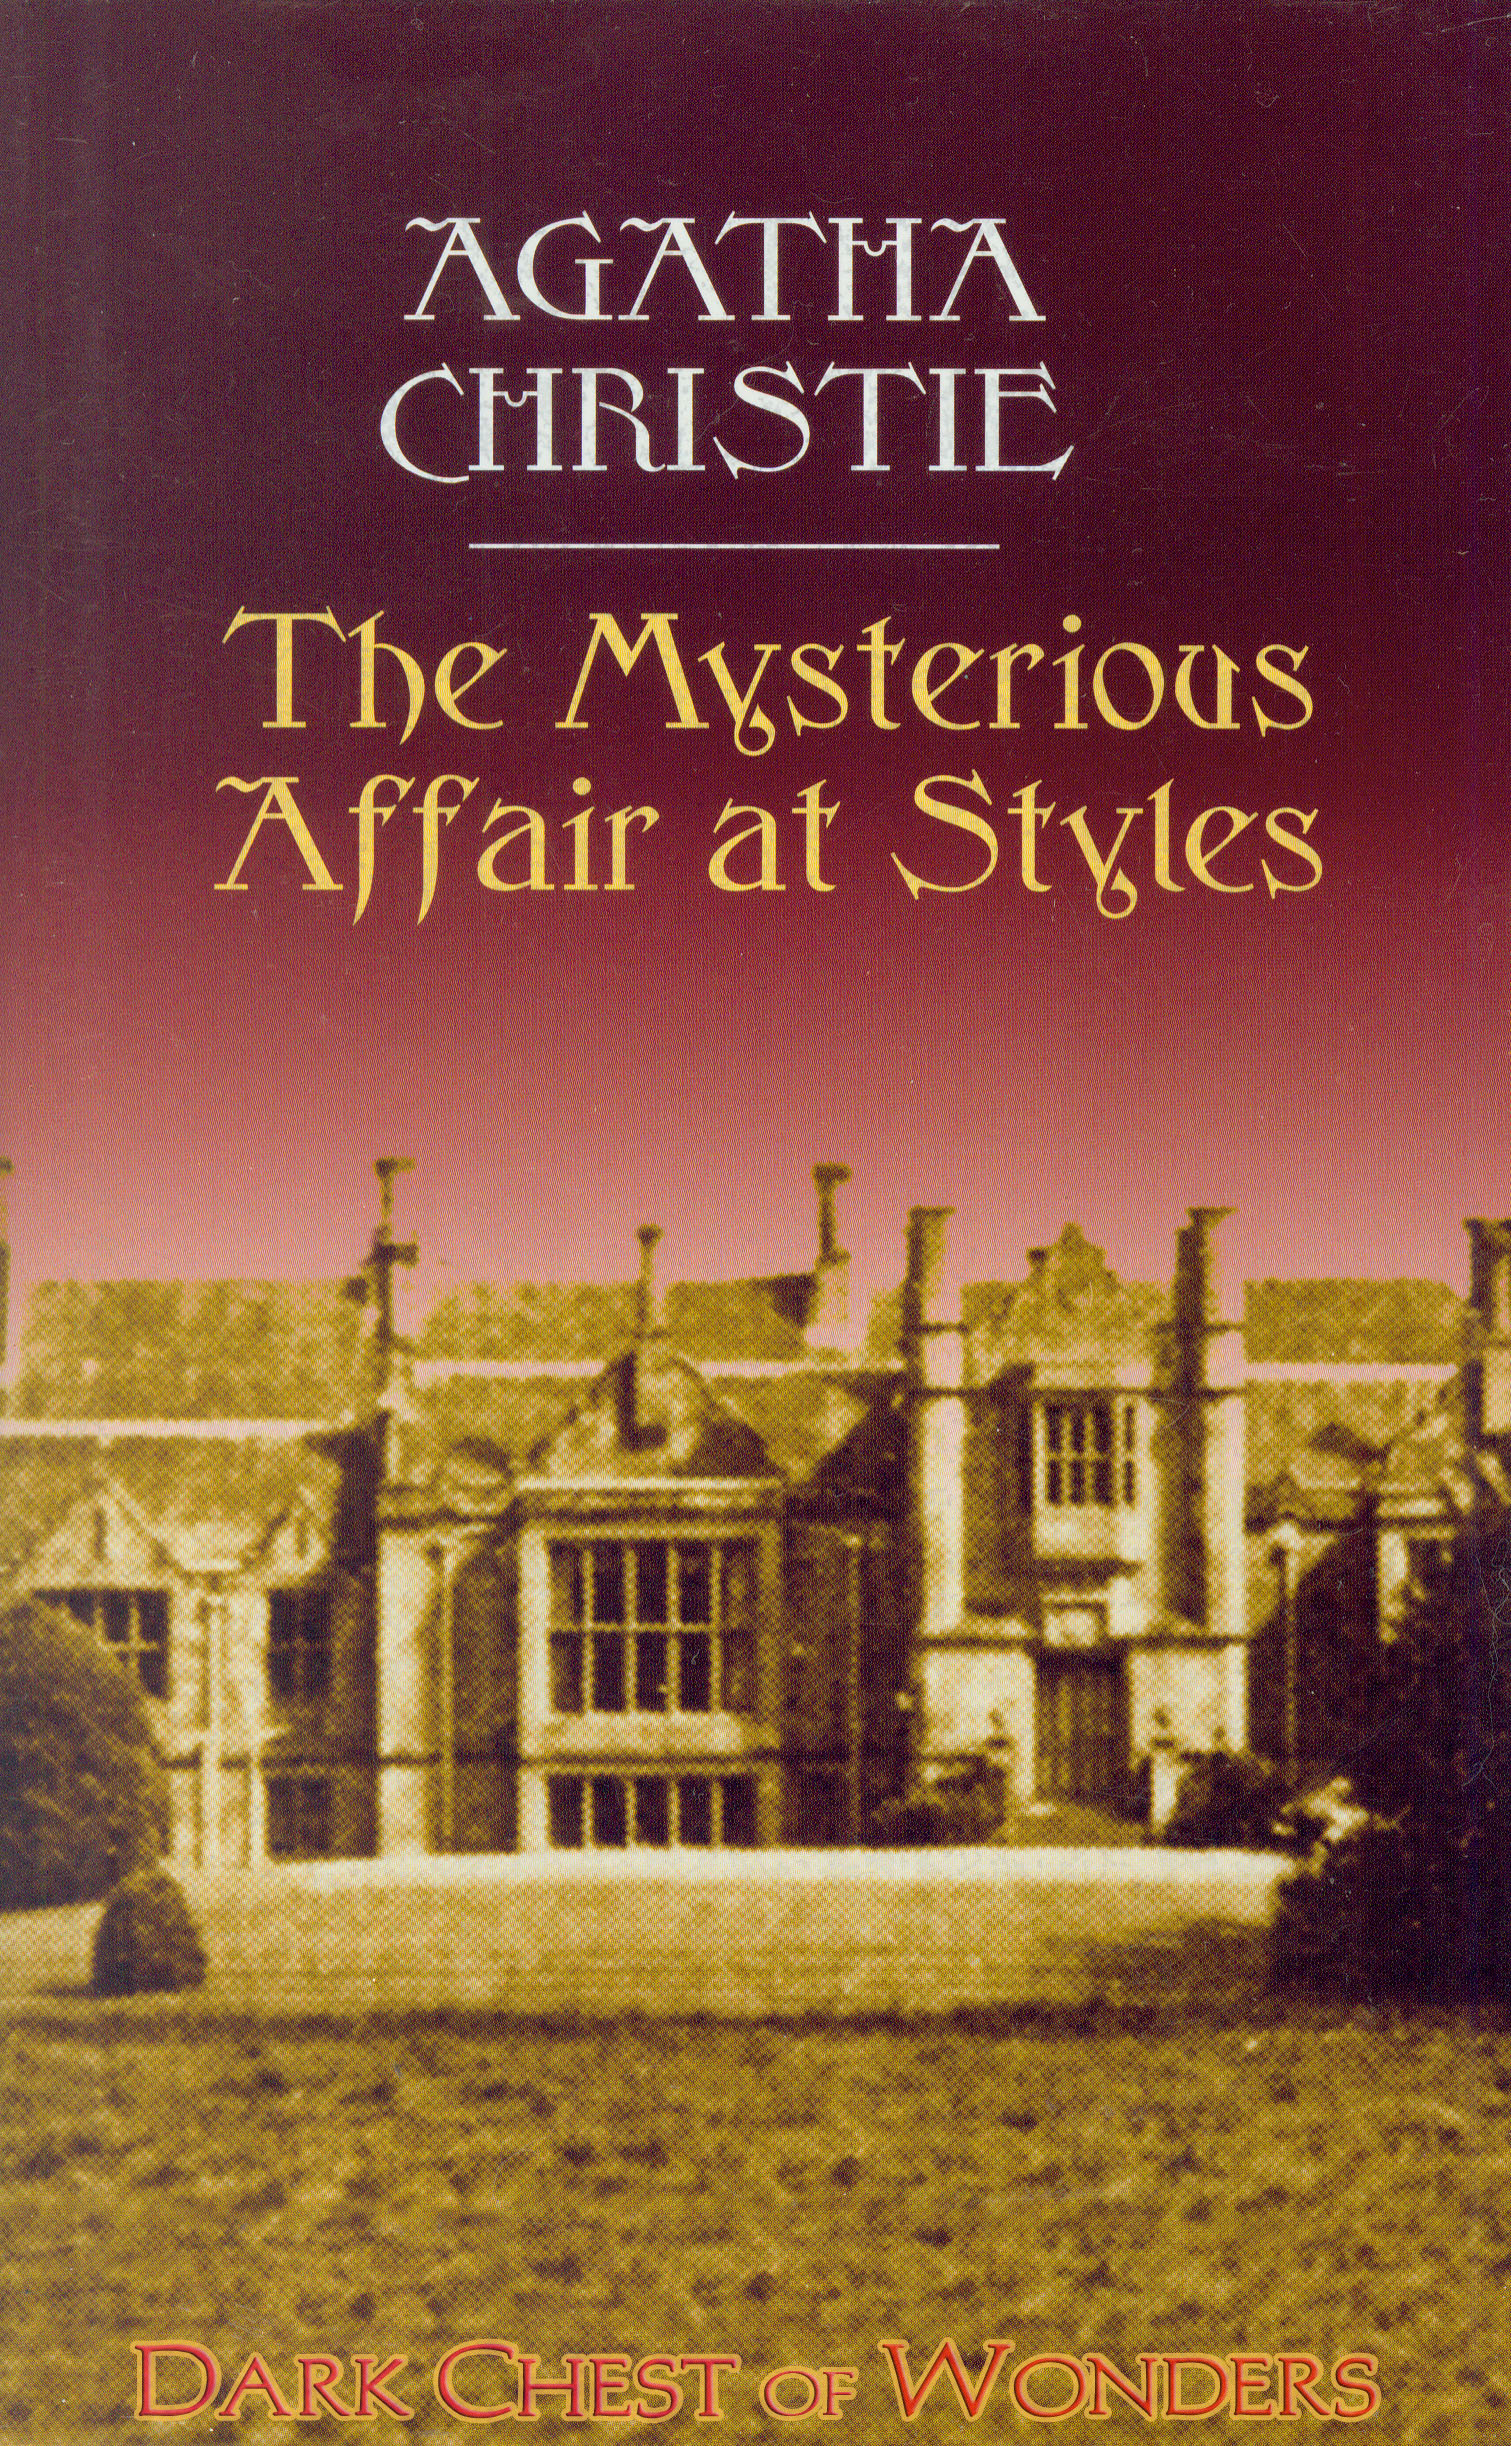 The Mysterious Affair at Styles - Wikipedia